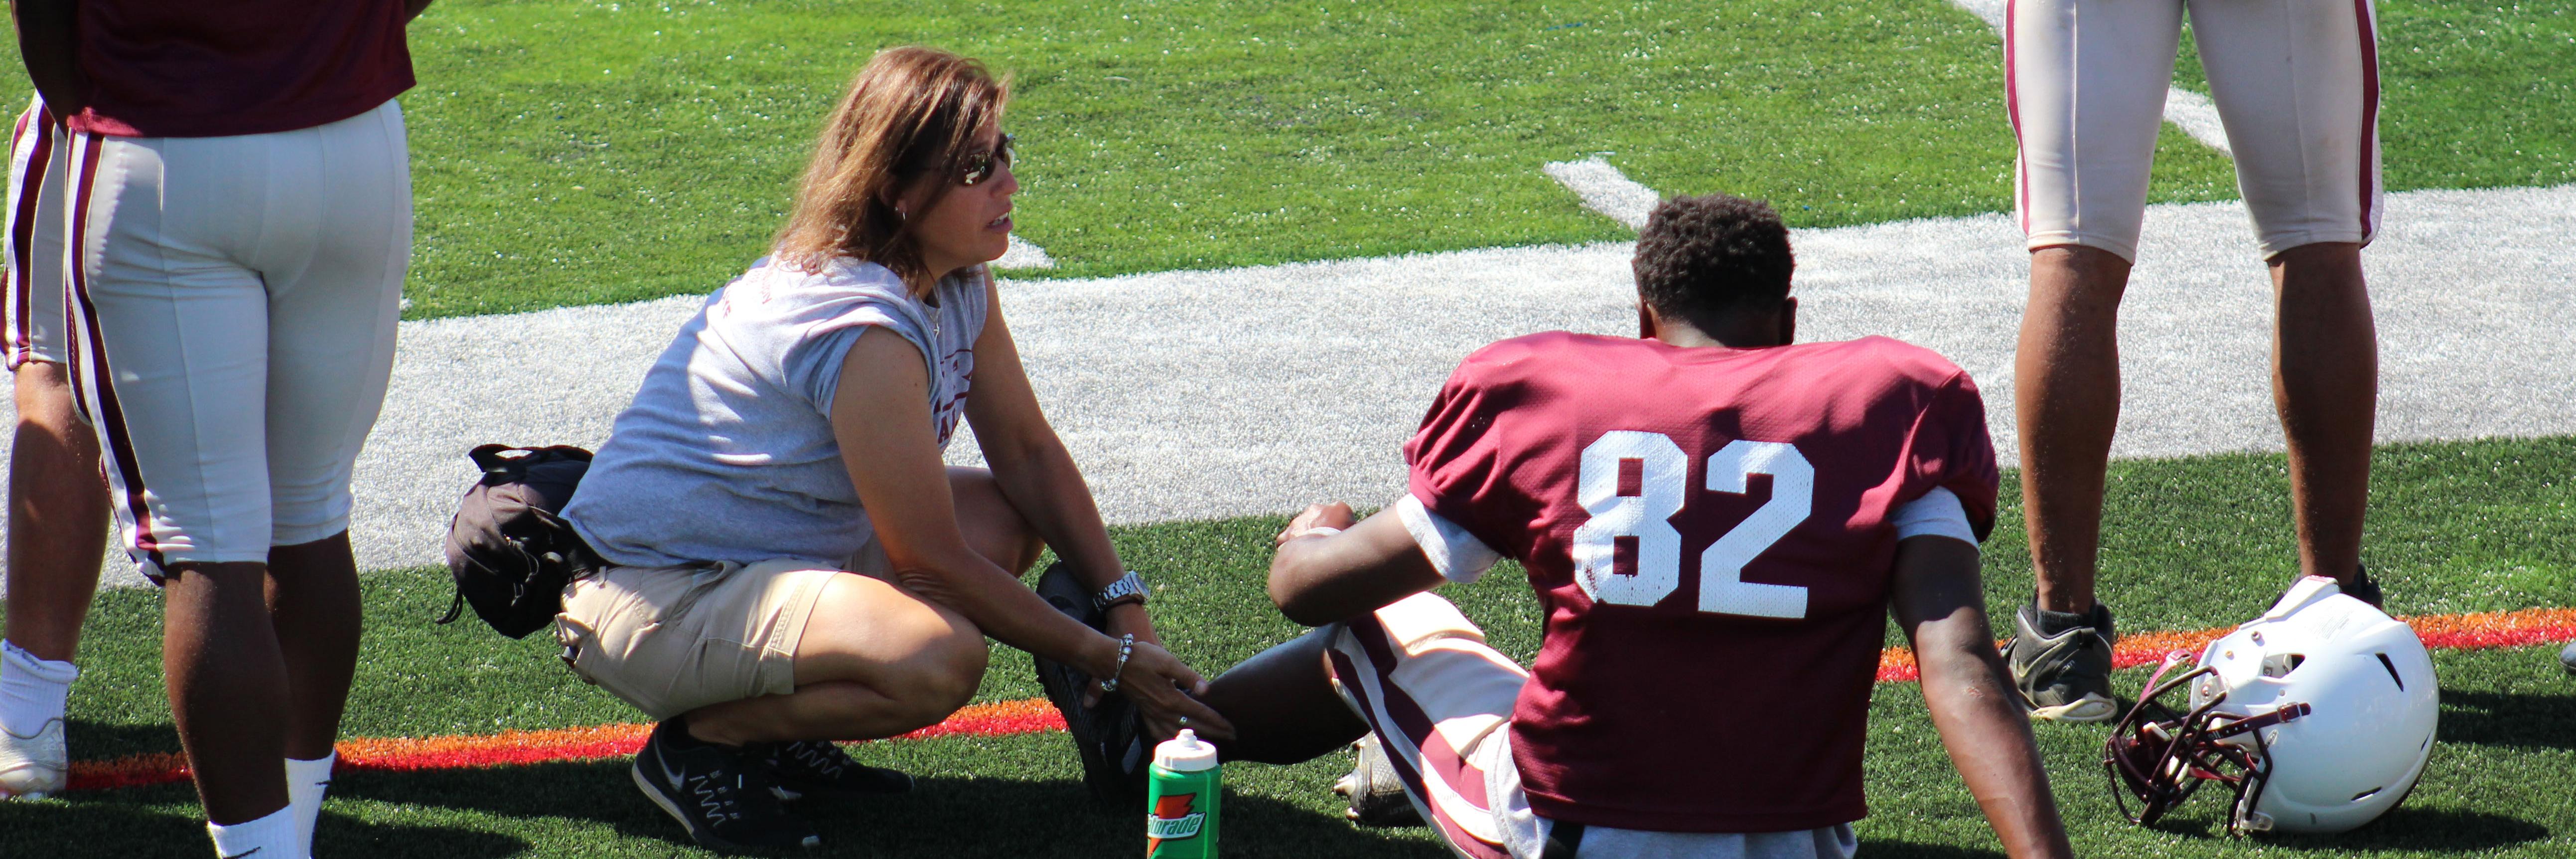 Athletic trainer treating a player on the side of a playing field